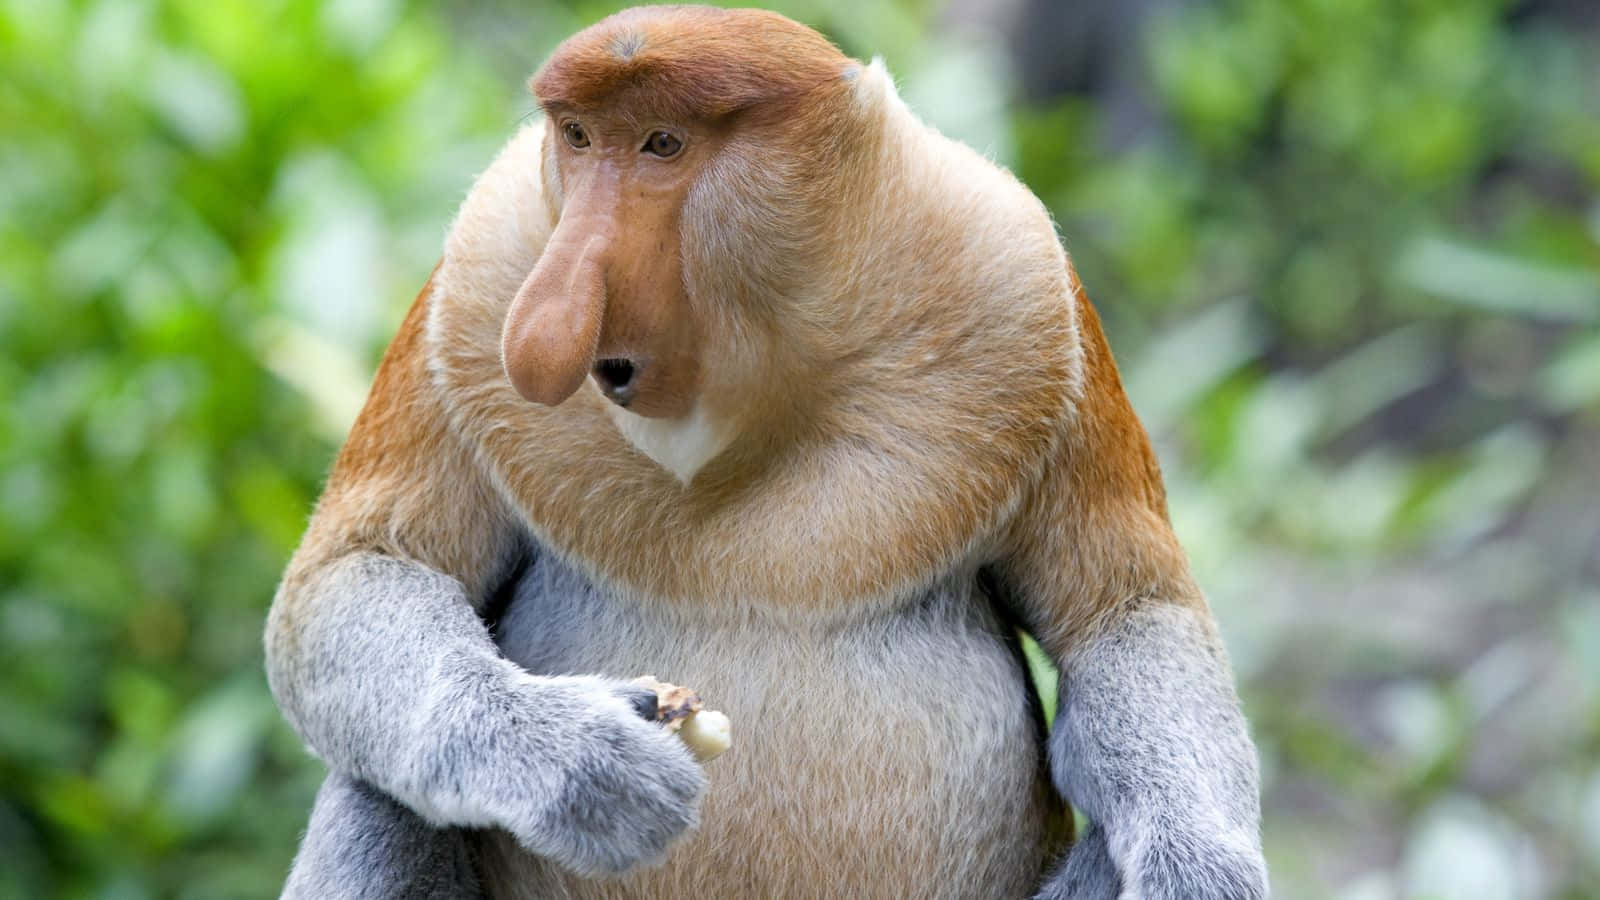 Fat Ugly Monkey Pictures